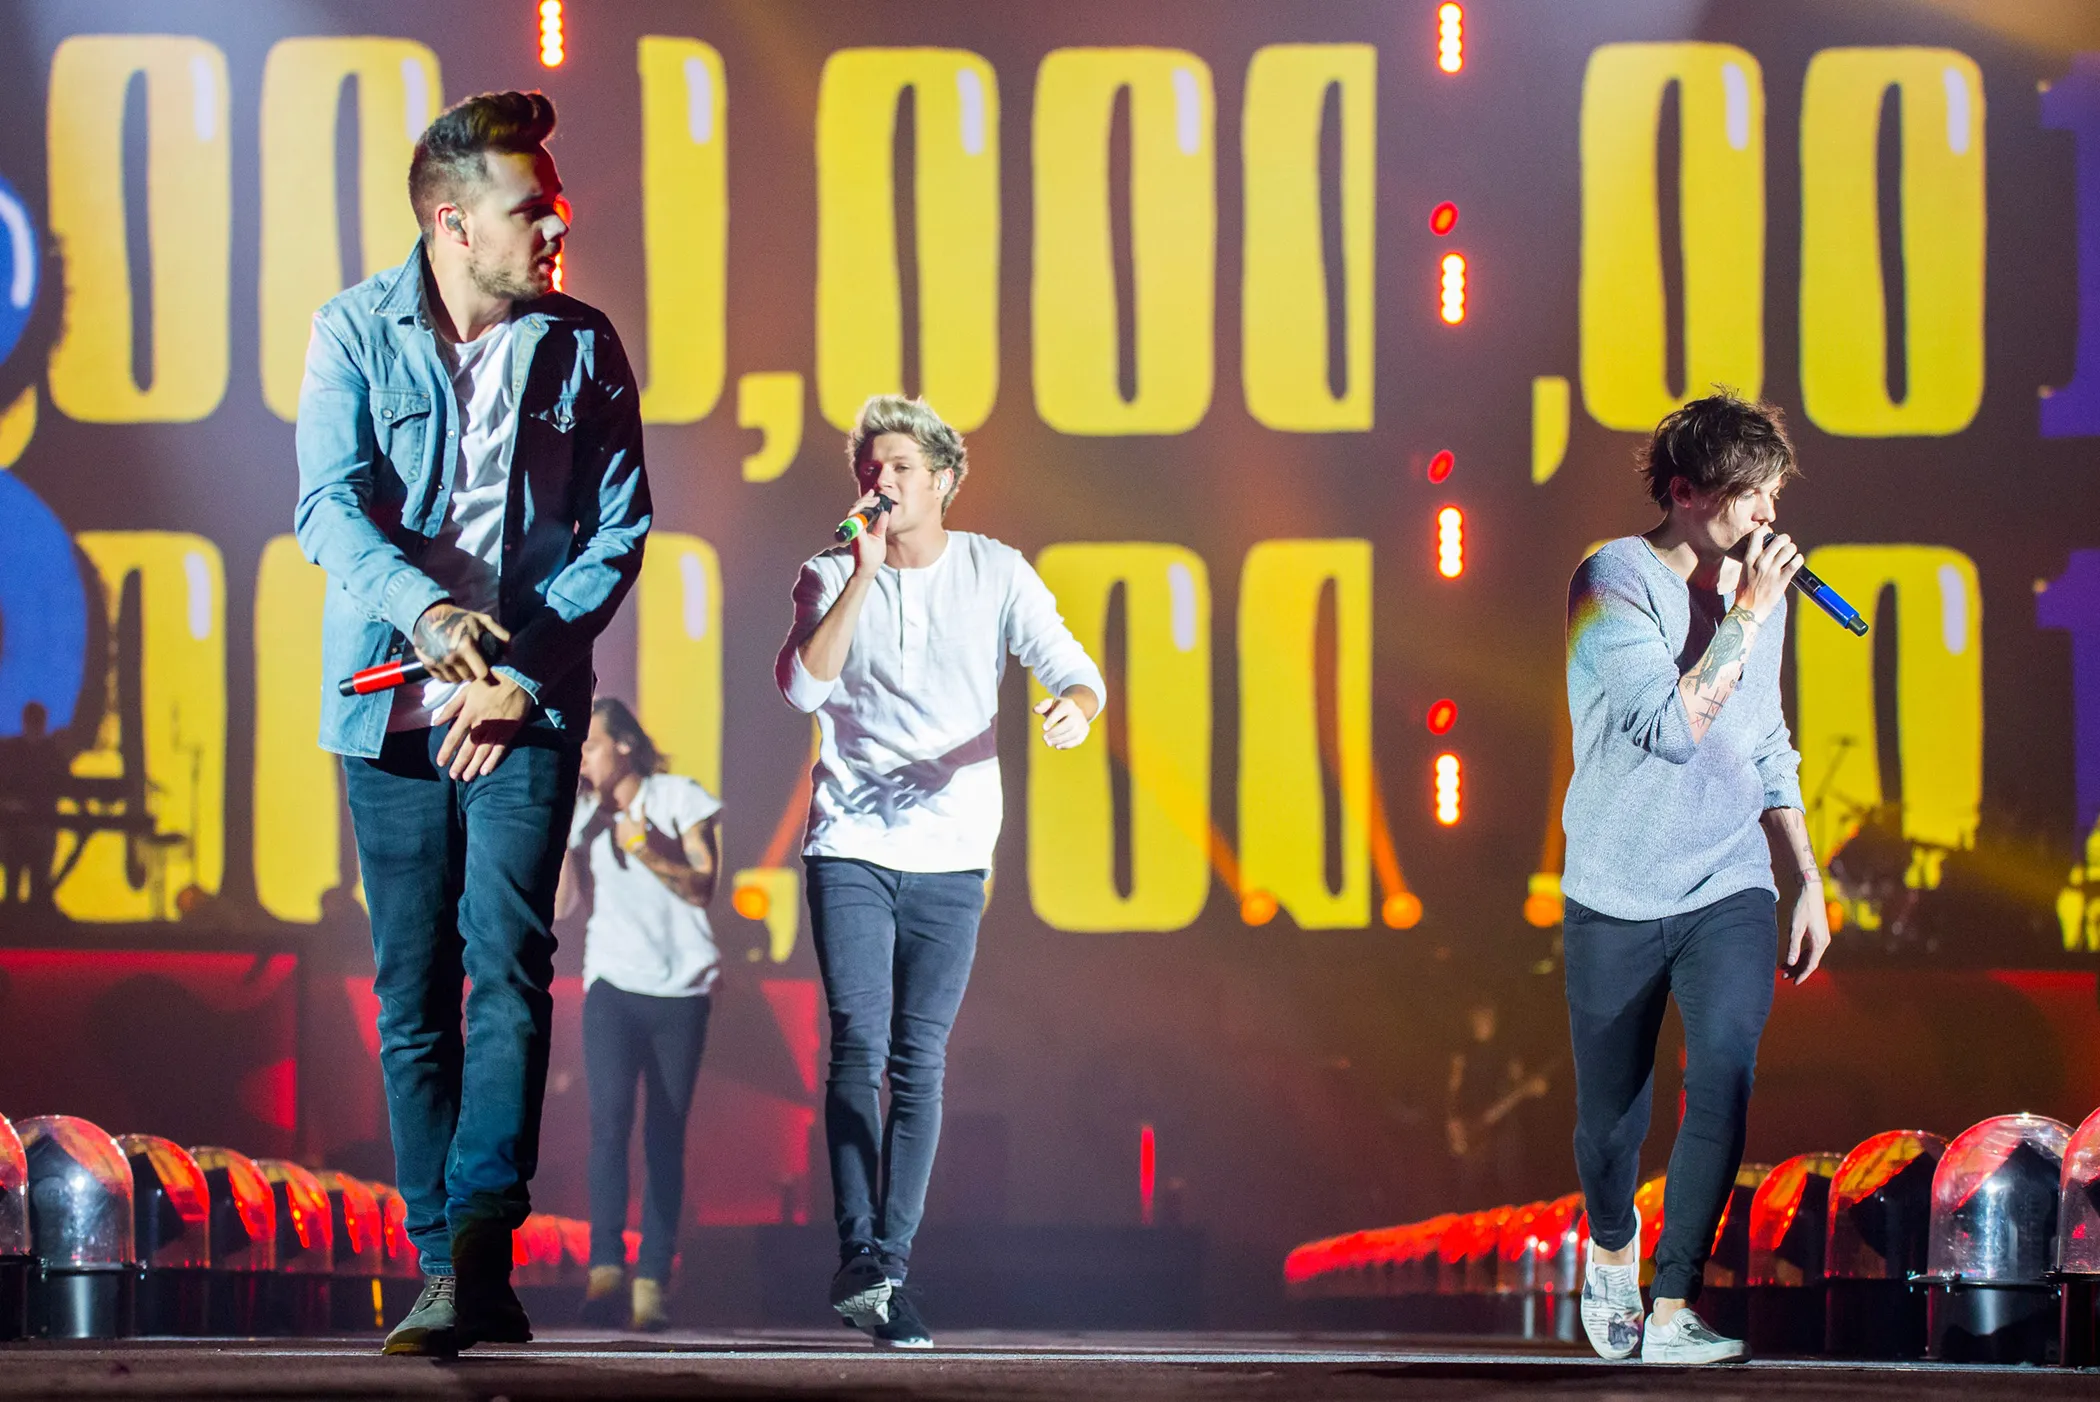 One Direction Paid $15.9 Million More in UK Taxes than Facebook